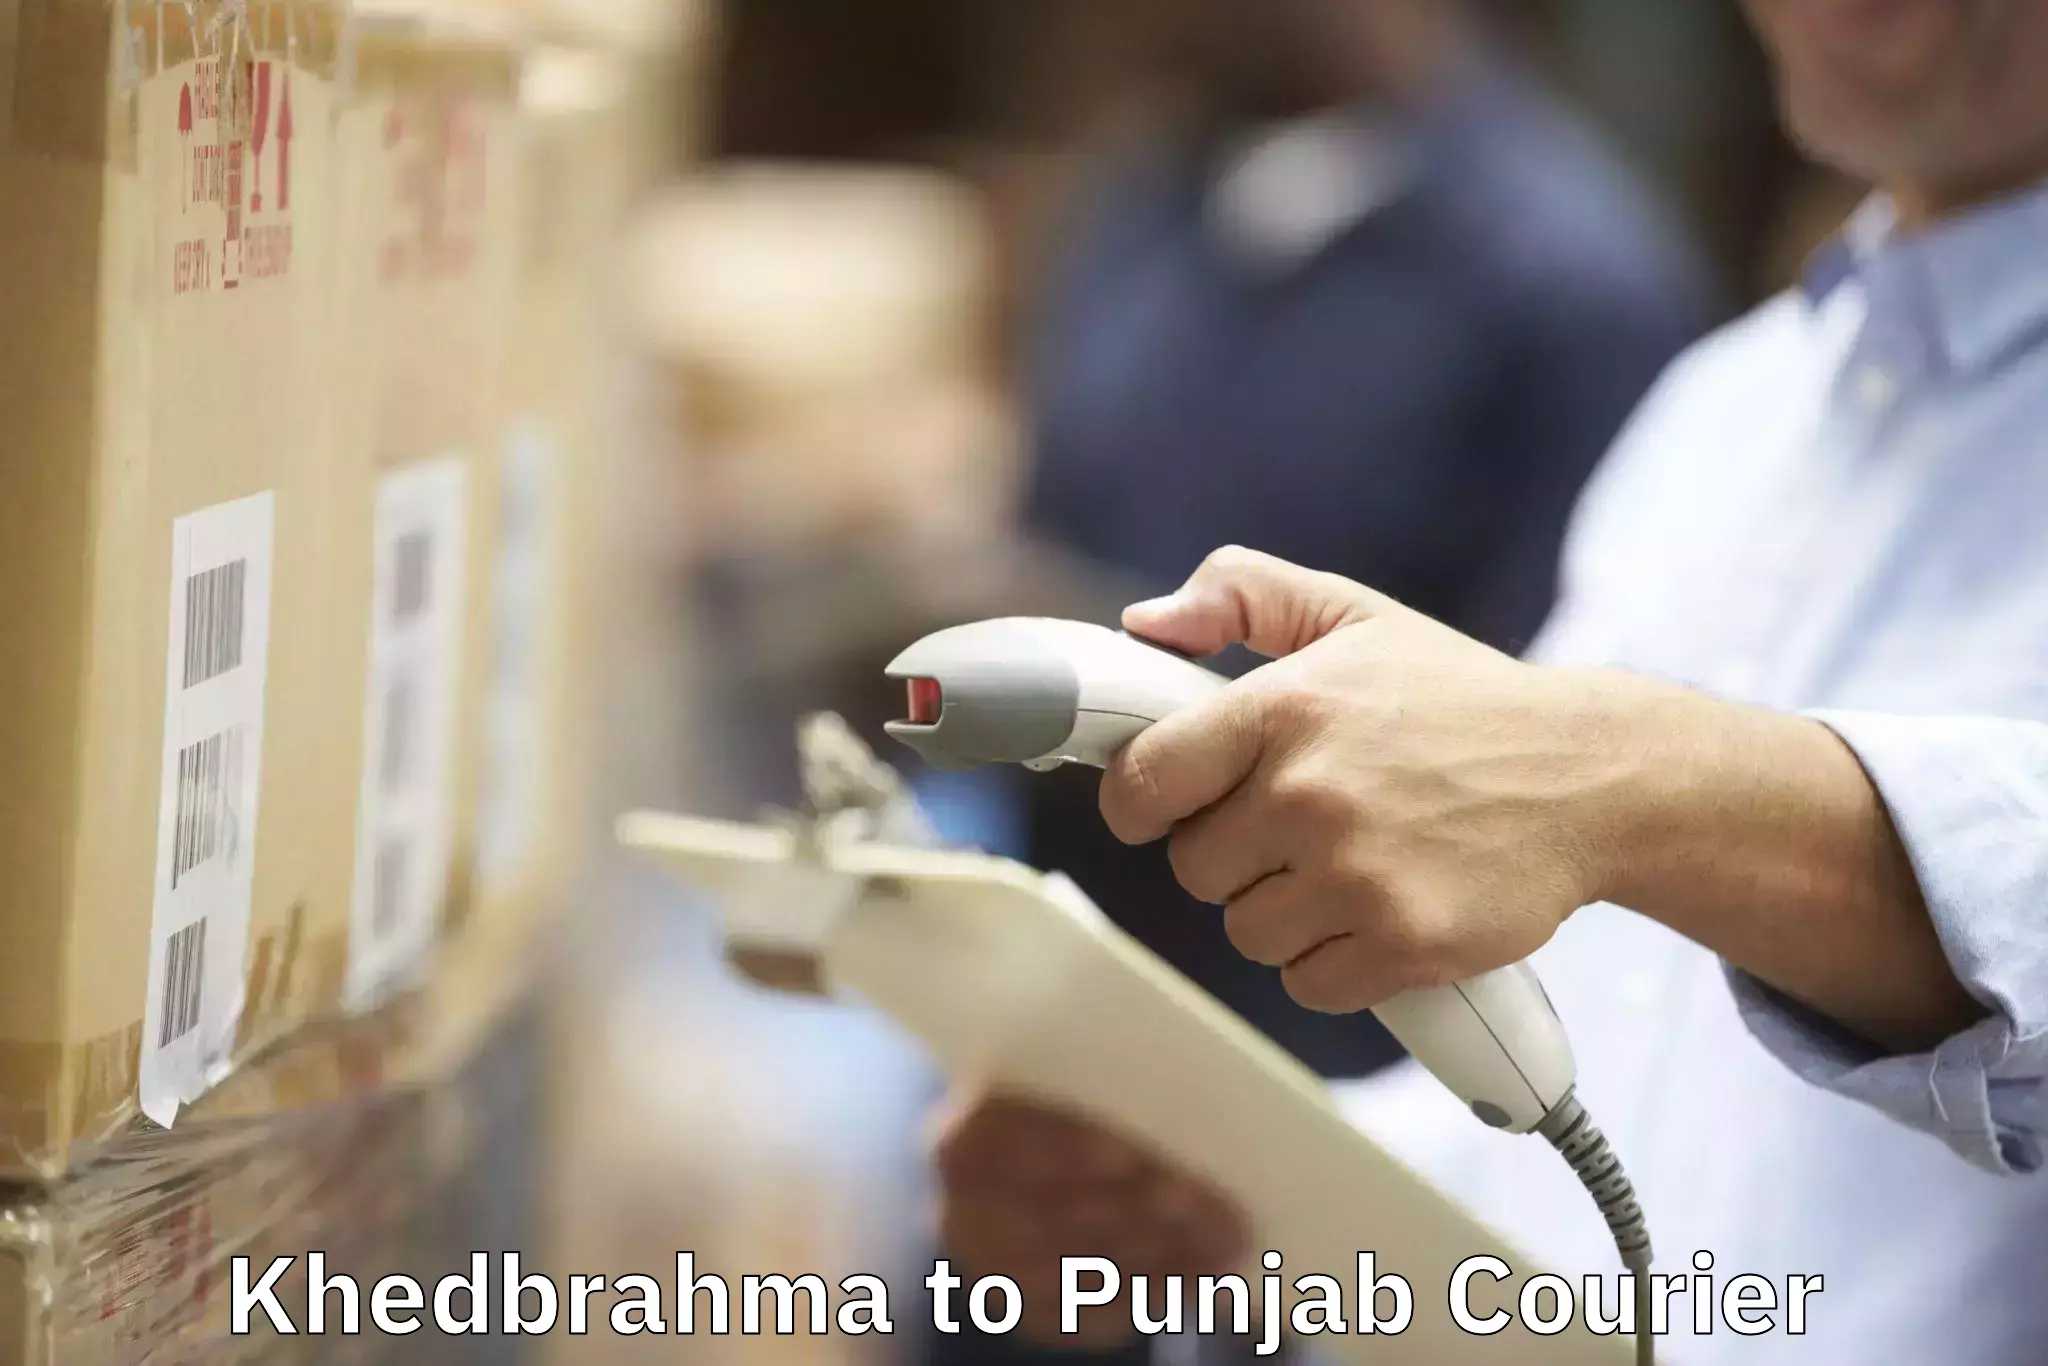 Home relocation experts Khedbrahma to Mohali